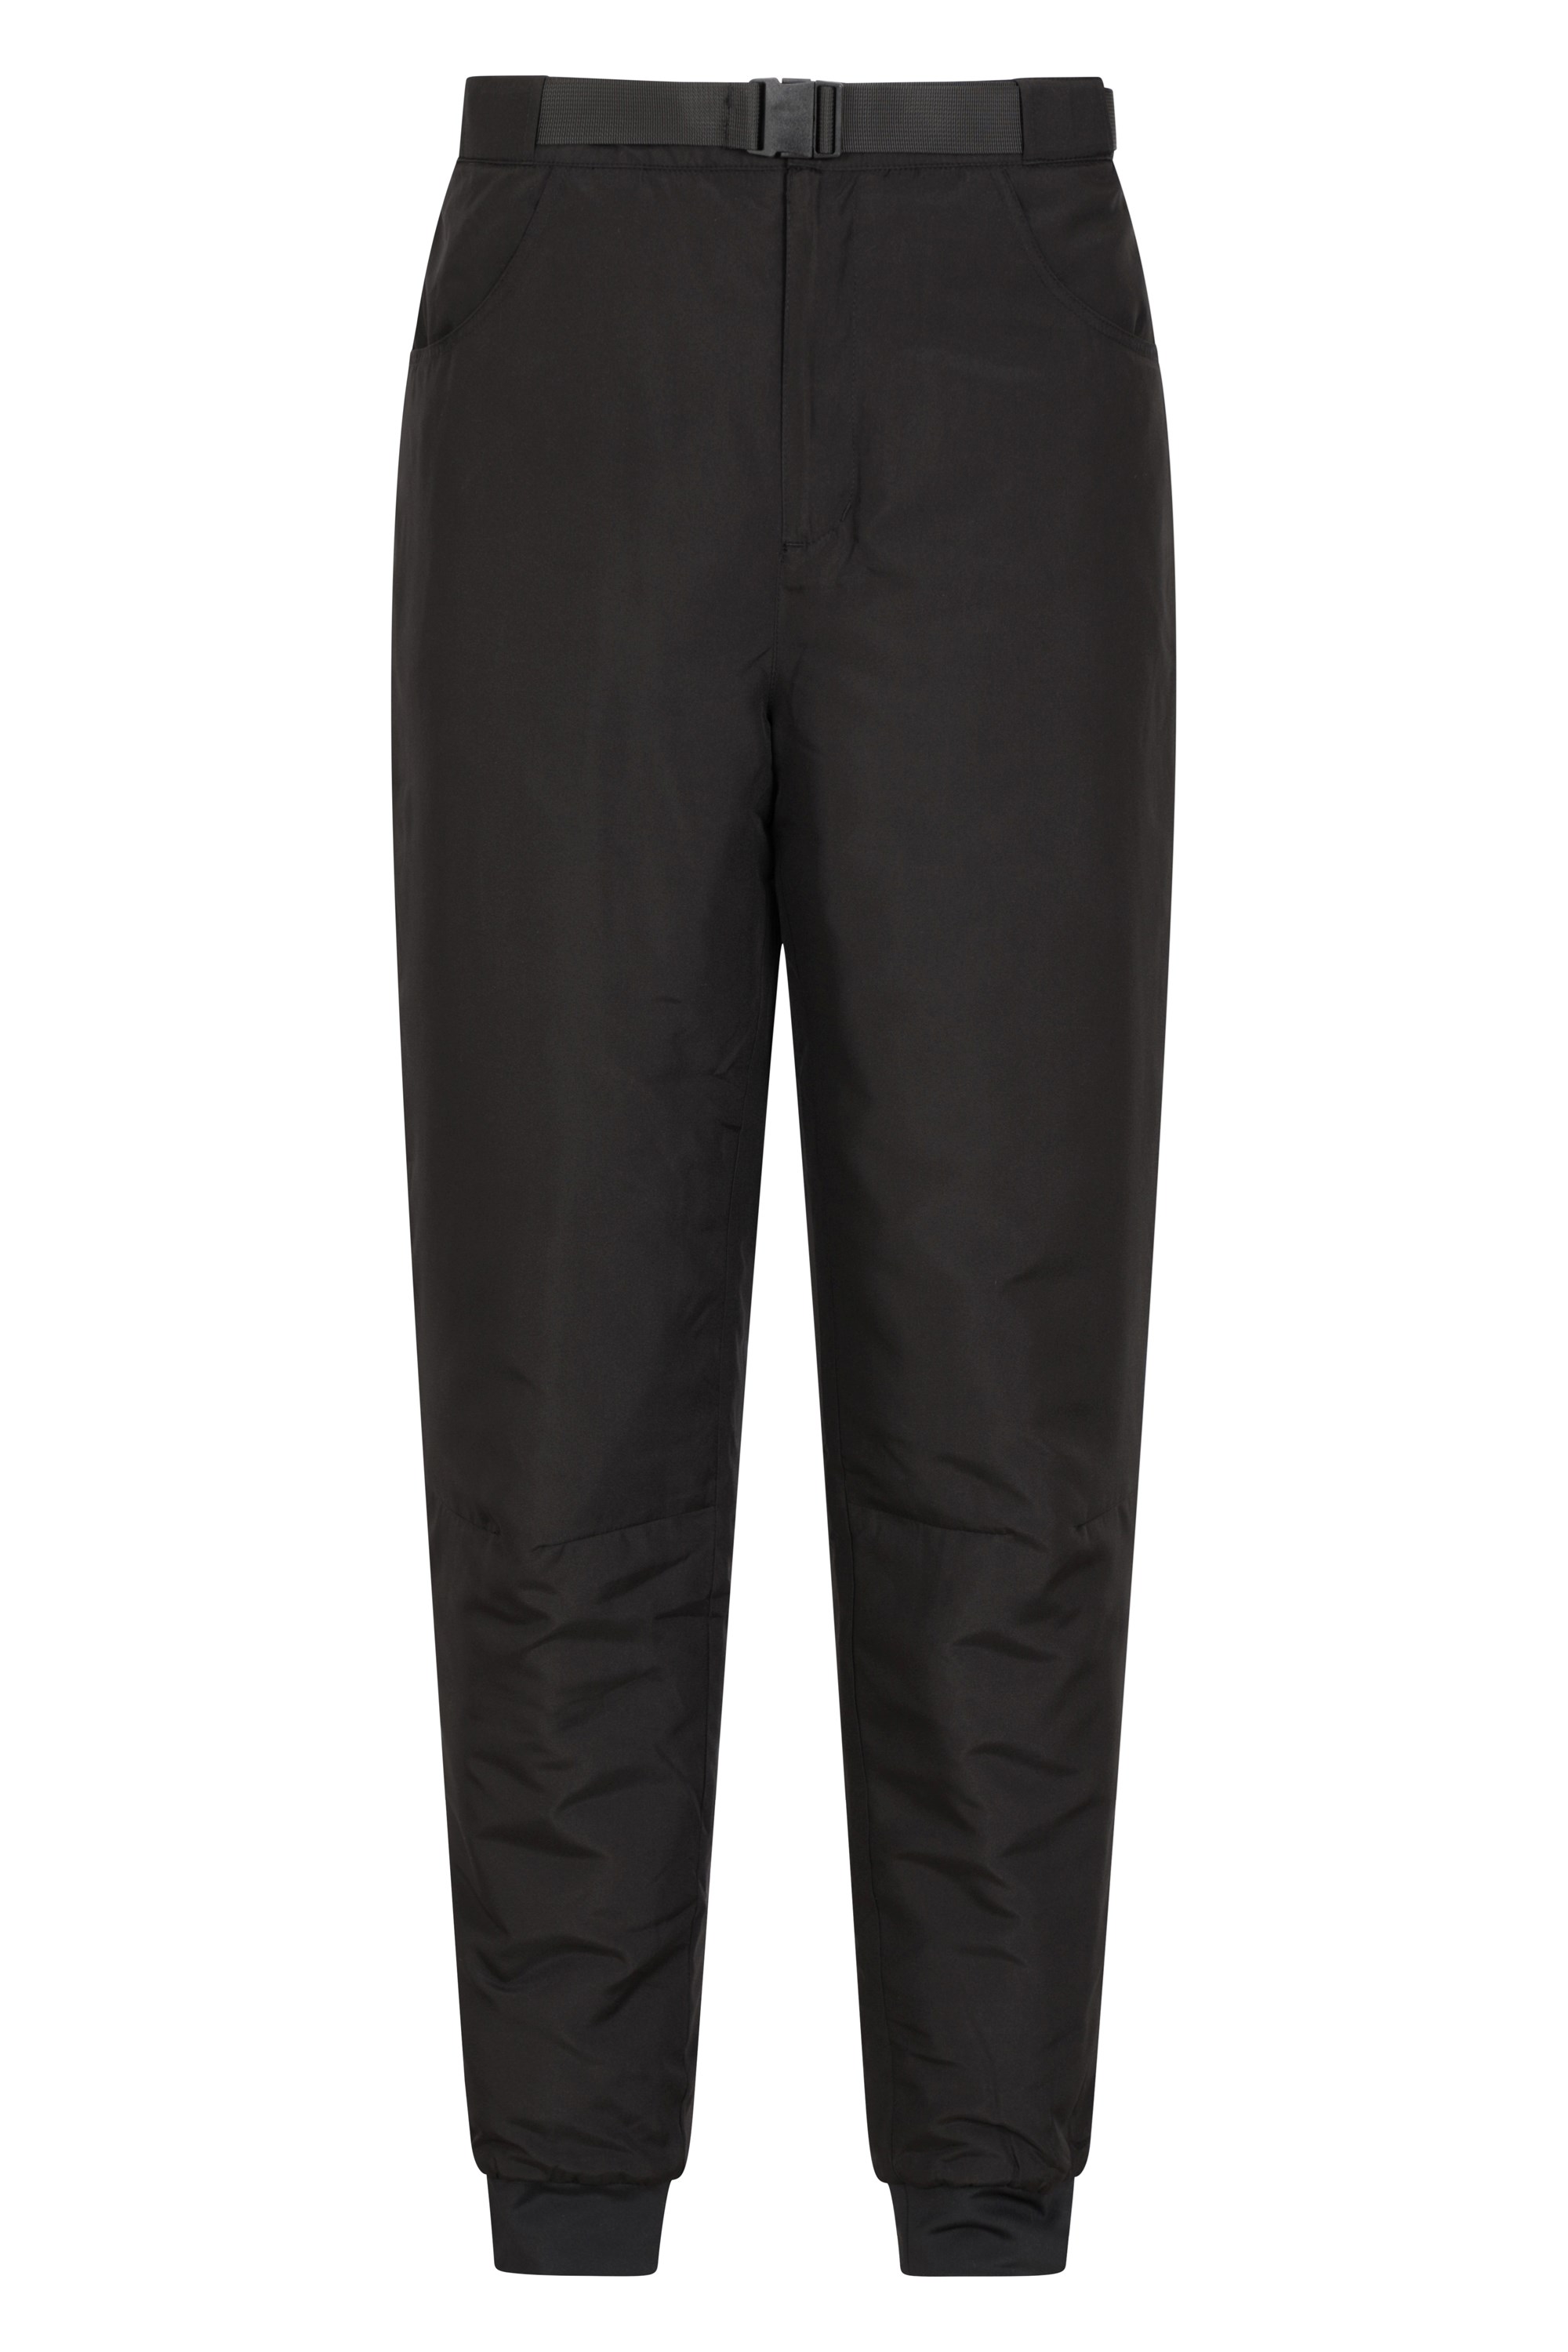 Marsh Mens Insulated Trousers - Black